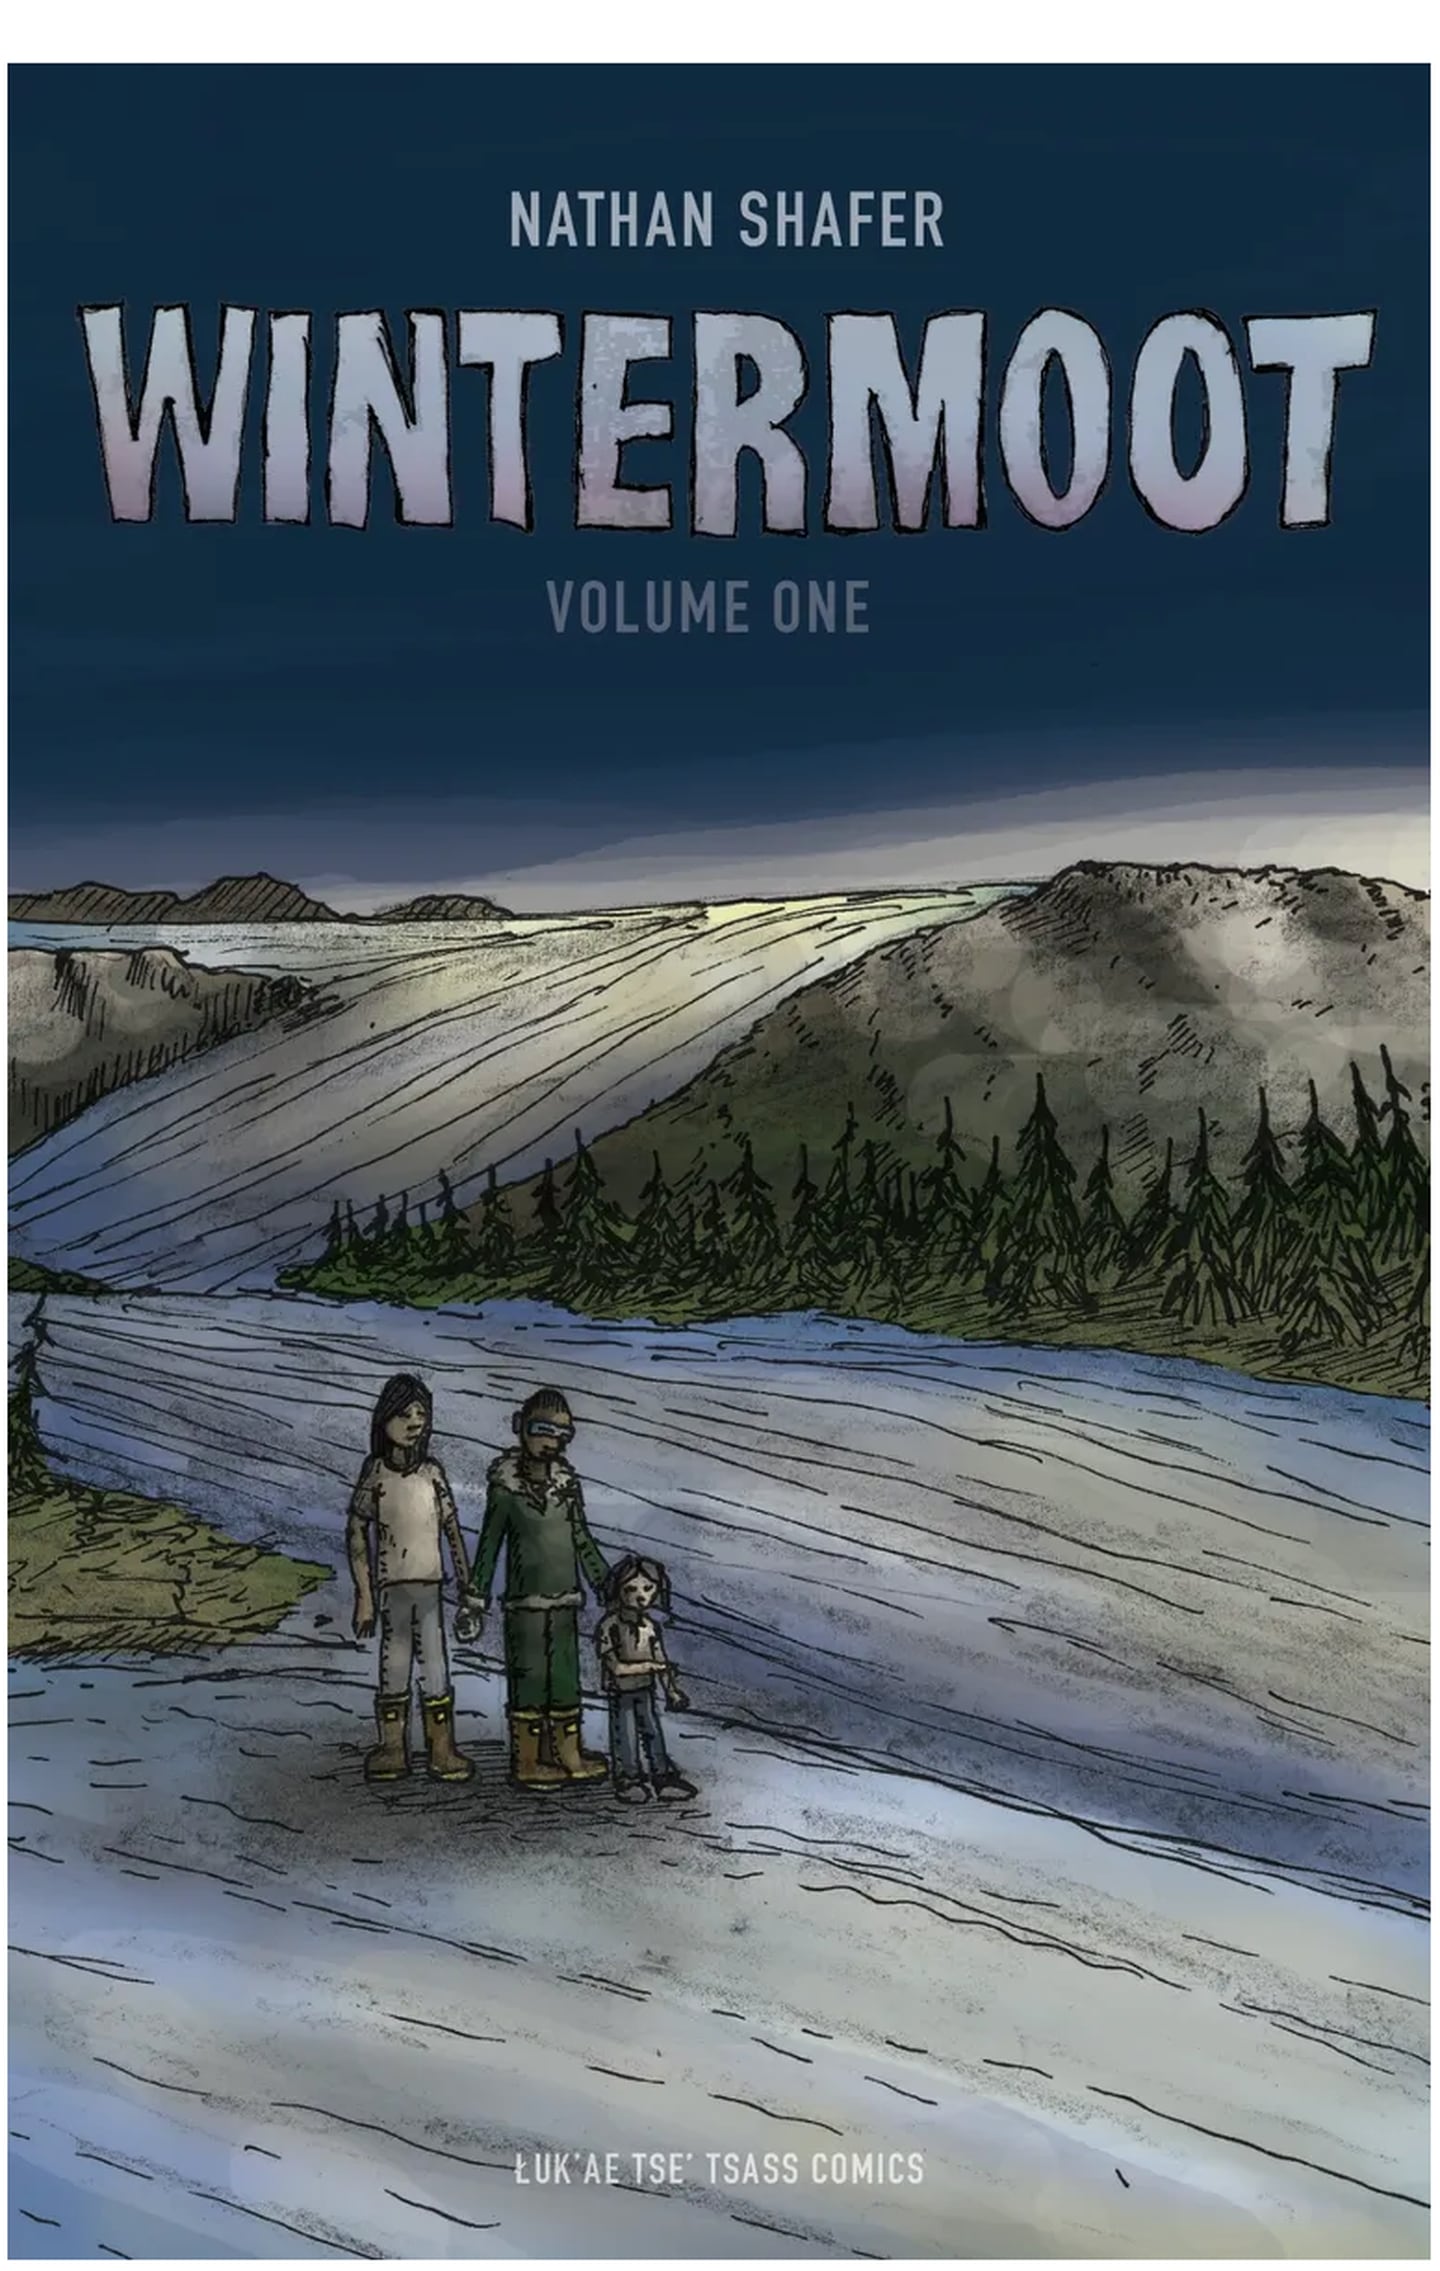 "Wintermoot" by Nathan Shafer